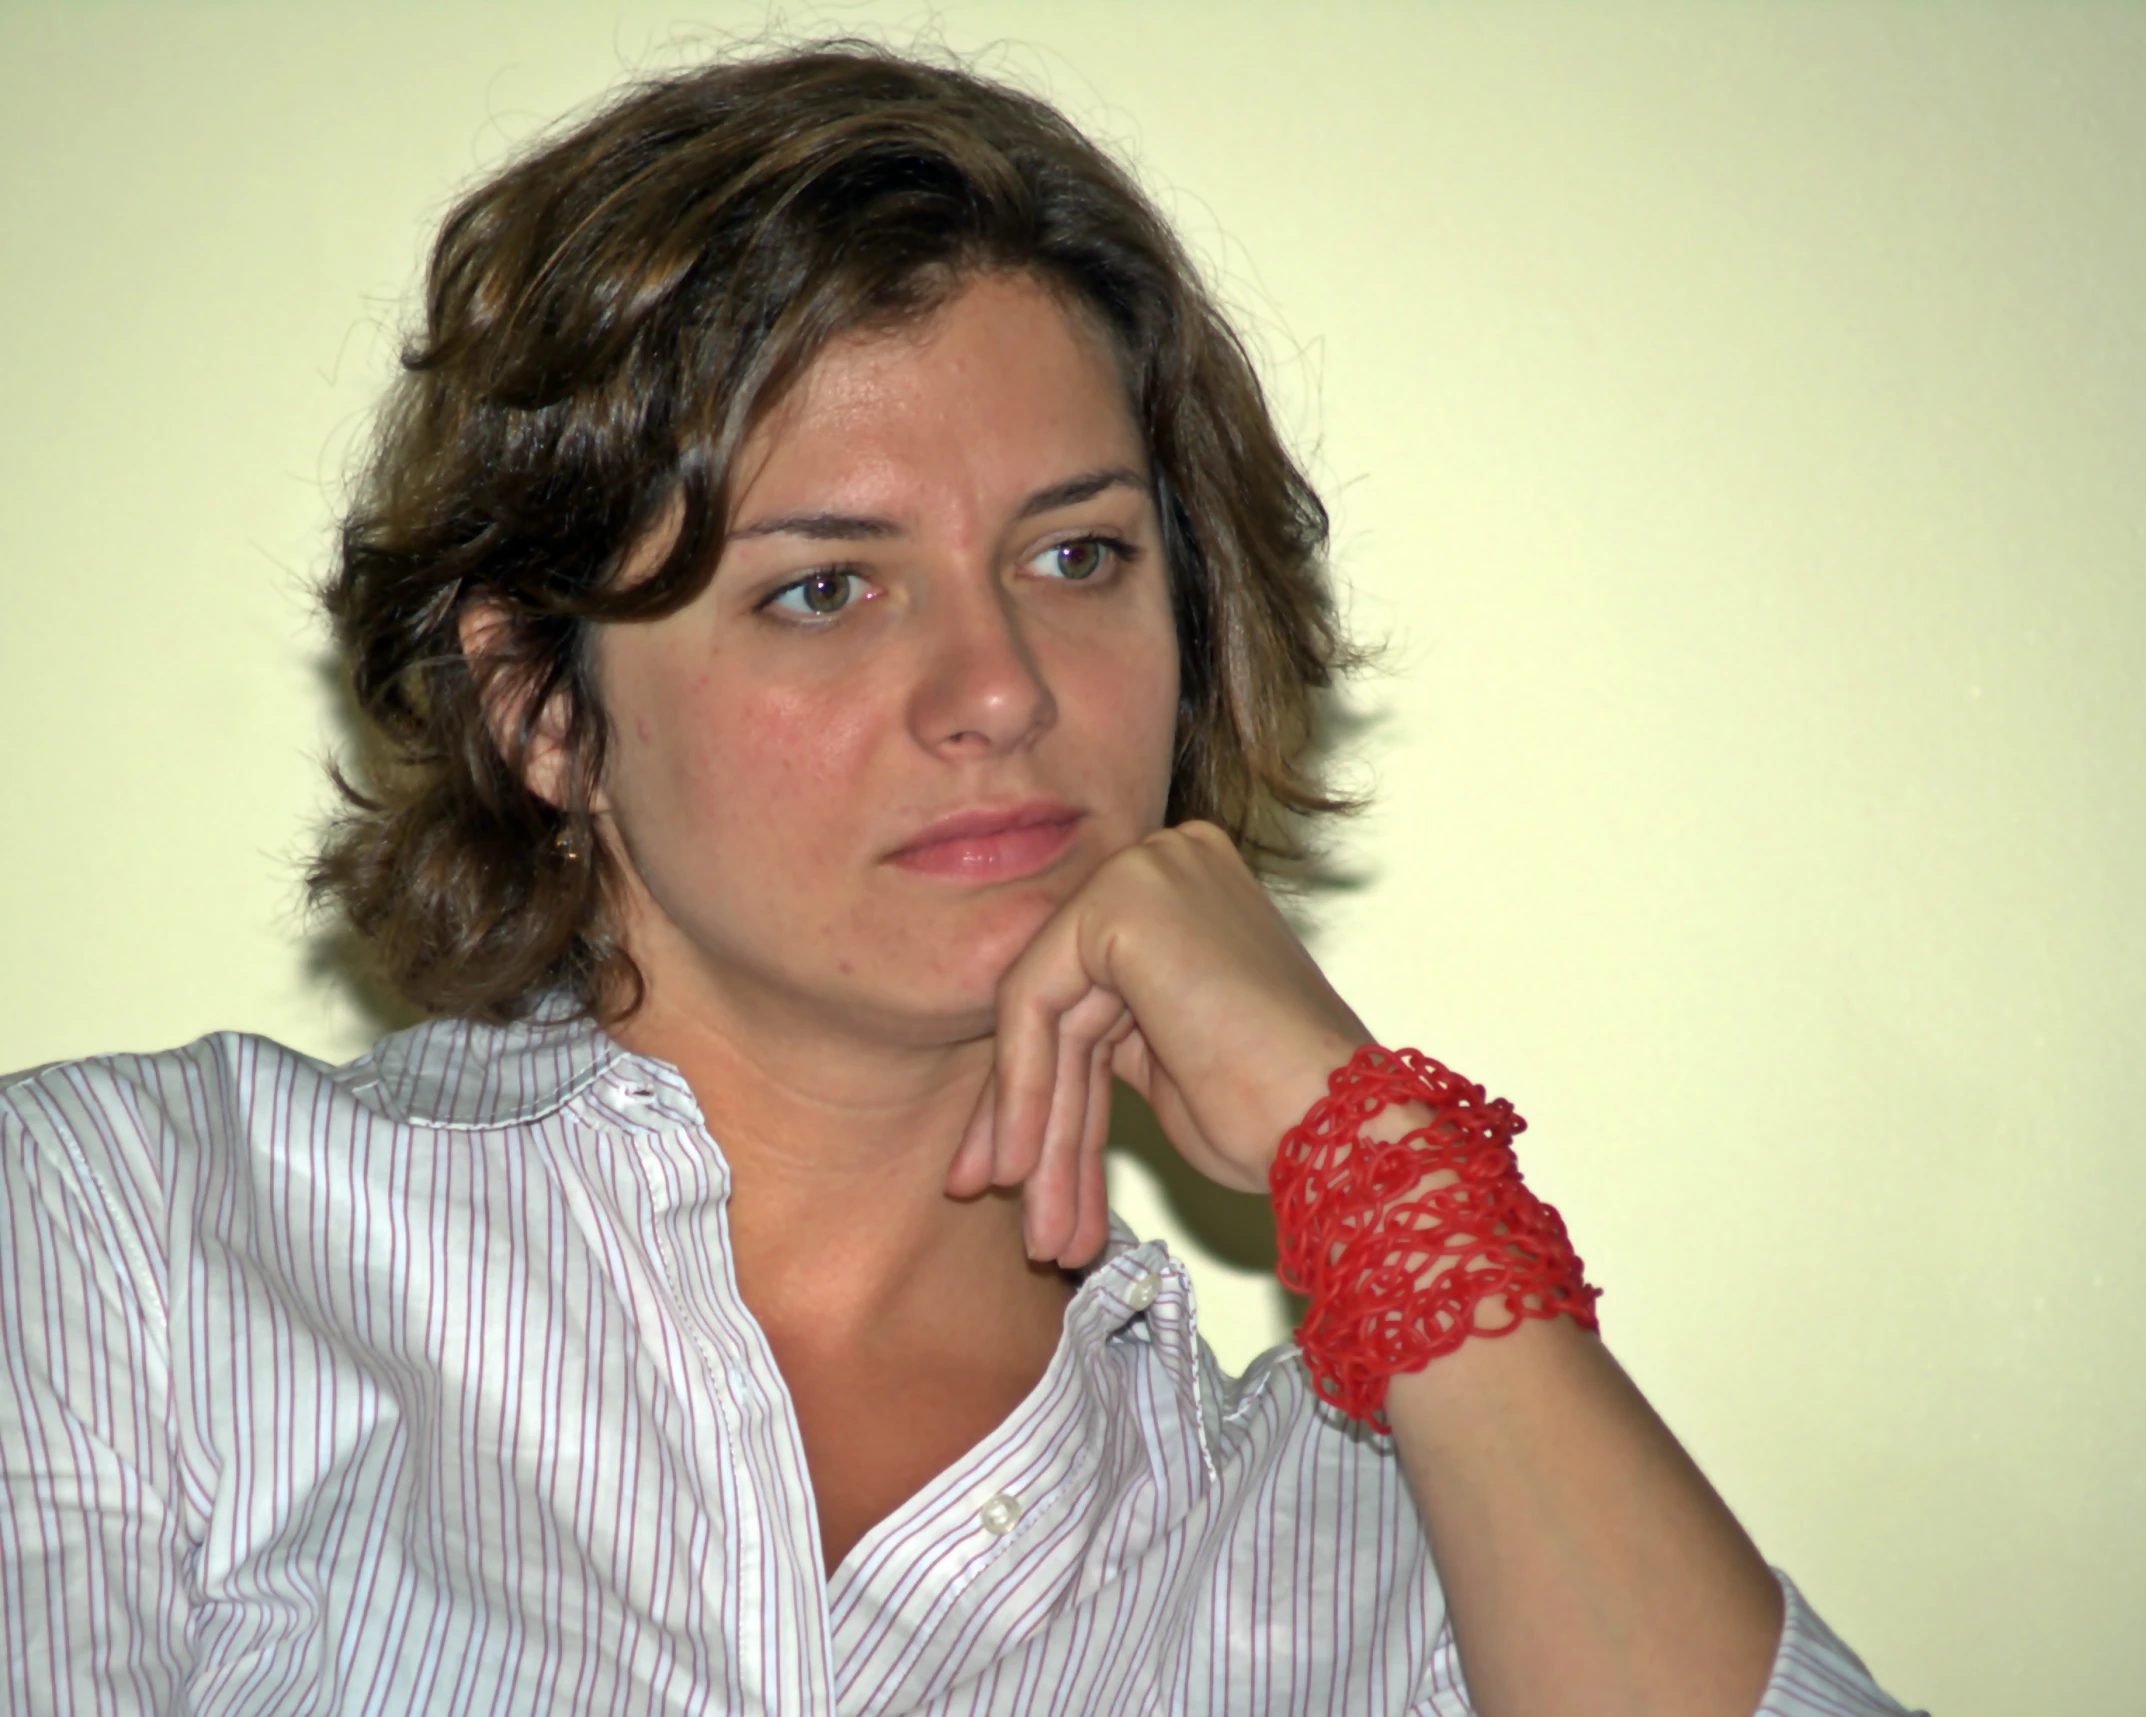 woman in a white shirt with a red celet